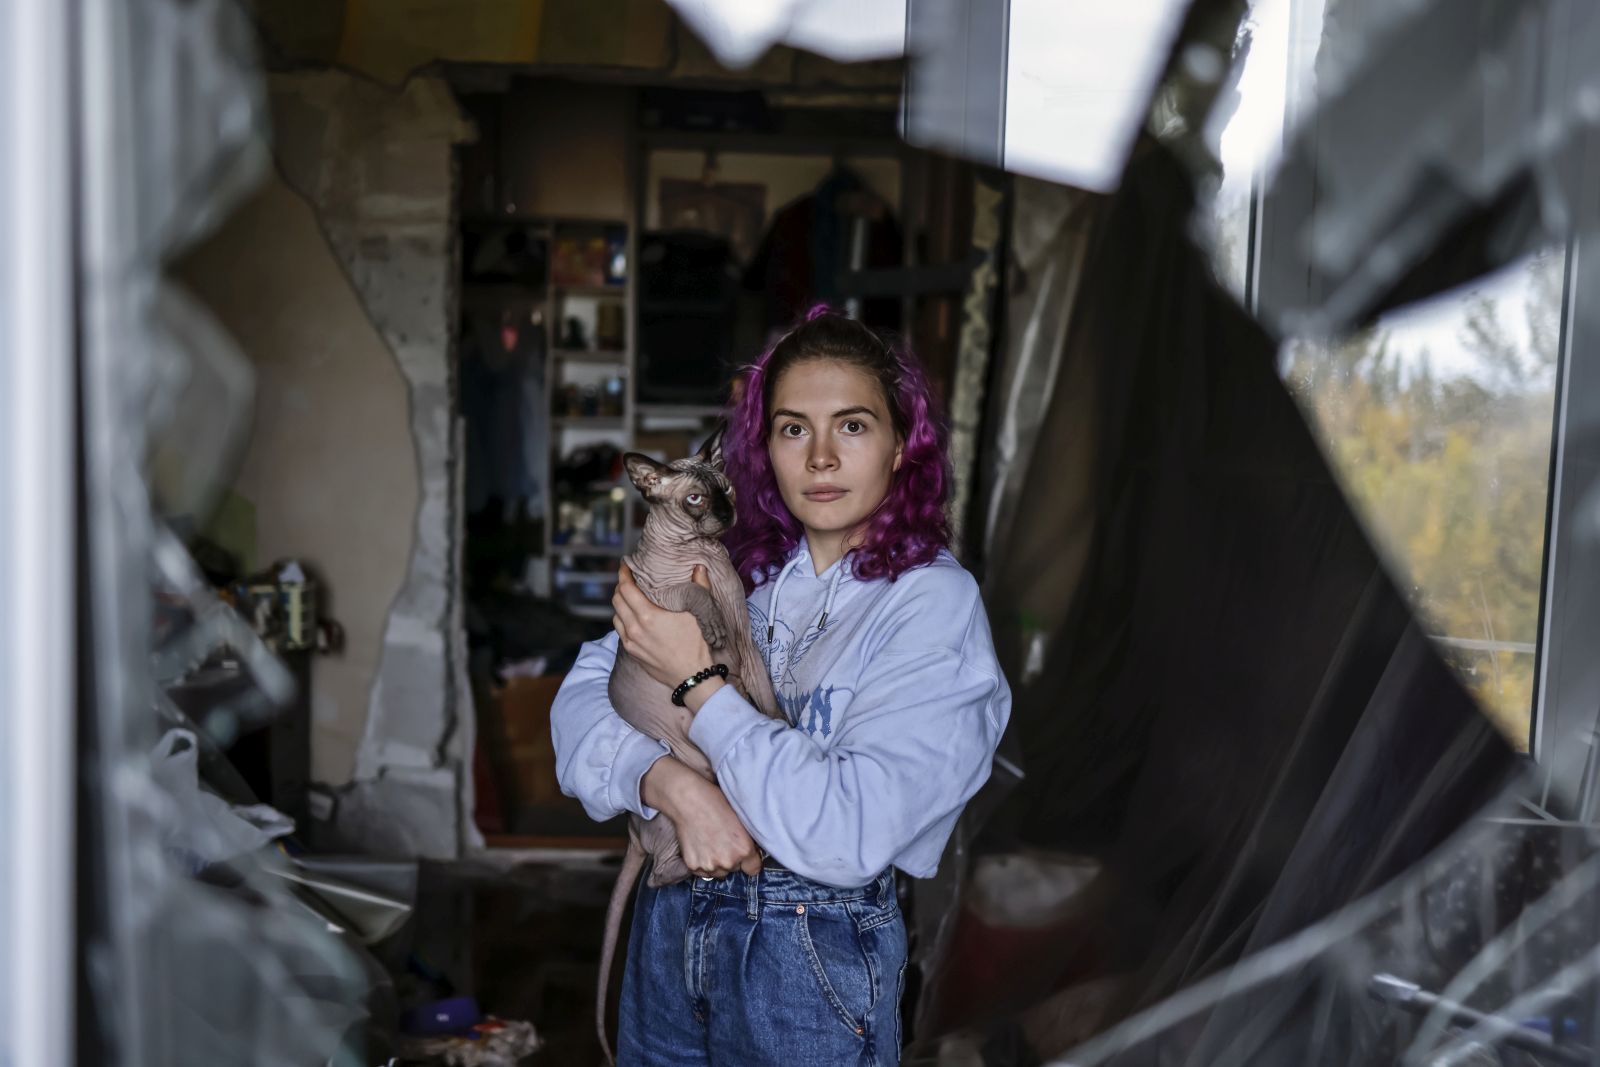 epa10271556 Katja, 23, holds her cat Donald as she poses for a photo taken through the shattered window of her old apartment in Zaporizhzhia, Ukraine, 28 October 2022. The flat where she used to live with 19 cats and other animals, was hit during a Russian missile strike the previous month. She has since moved to a new apartment in the city. Russian troops on 24 February entered Ukrainian territory, starting a conflict that has provoked destruction and a humanitarian crisis.  EPA/HANNIBAL HANSCHKE